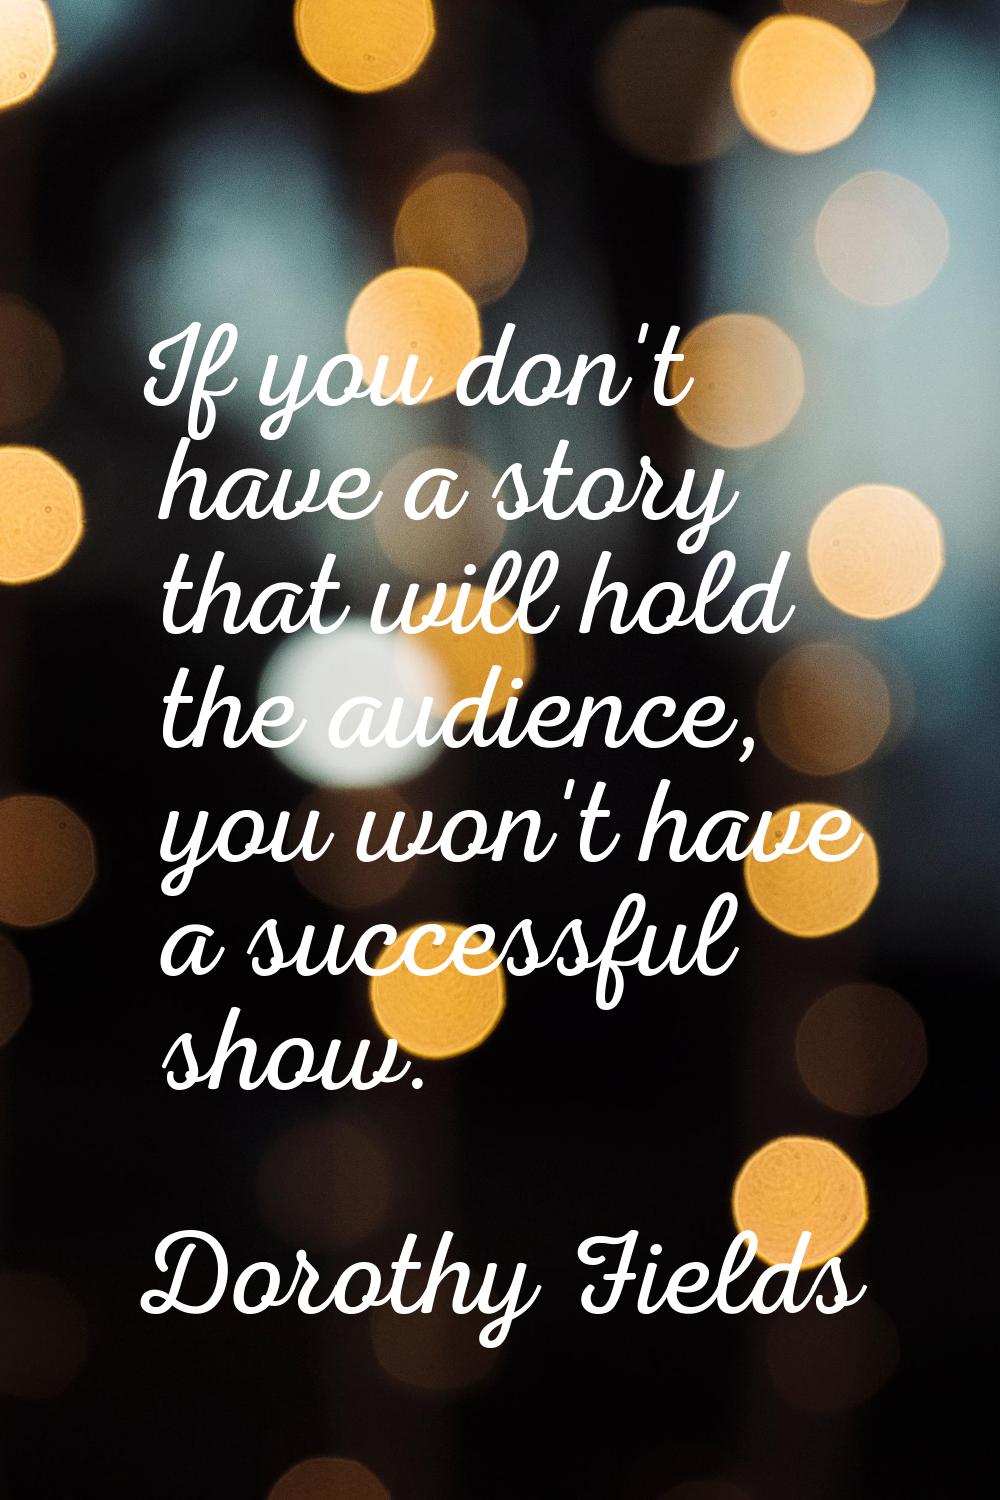 If you don't have a story that will hold the audience, you won't have a successful show.